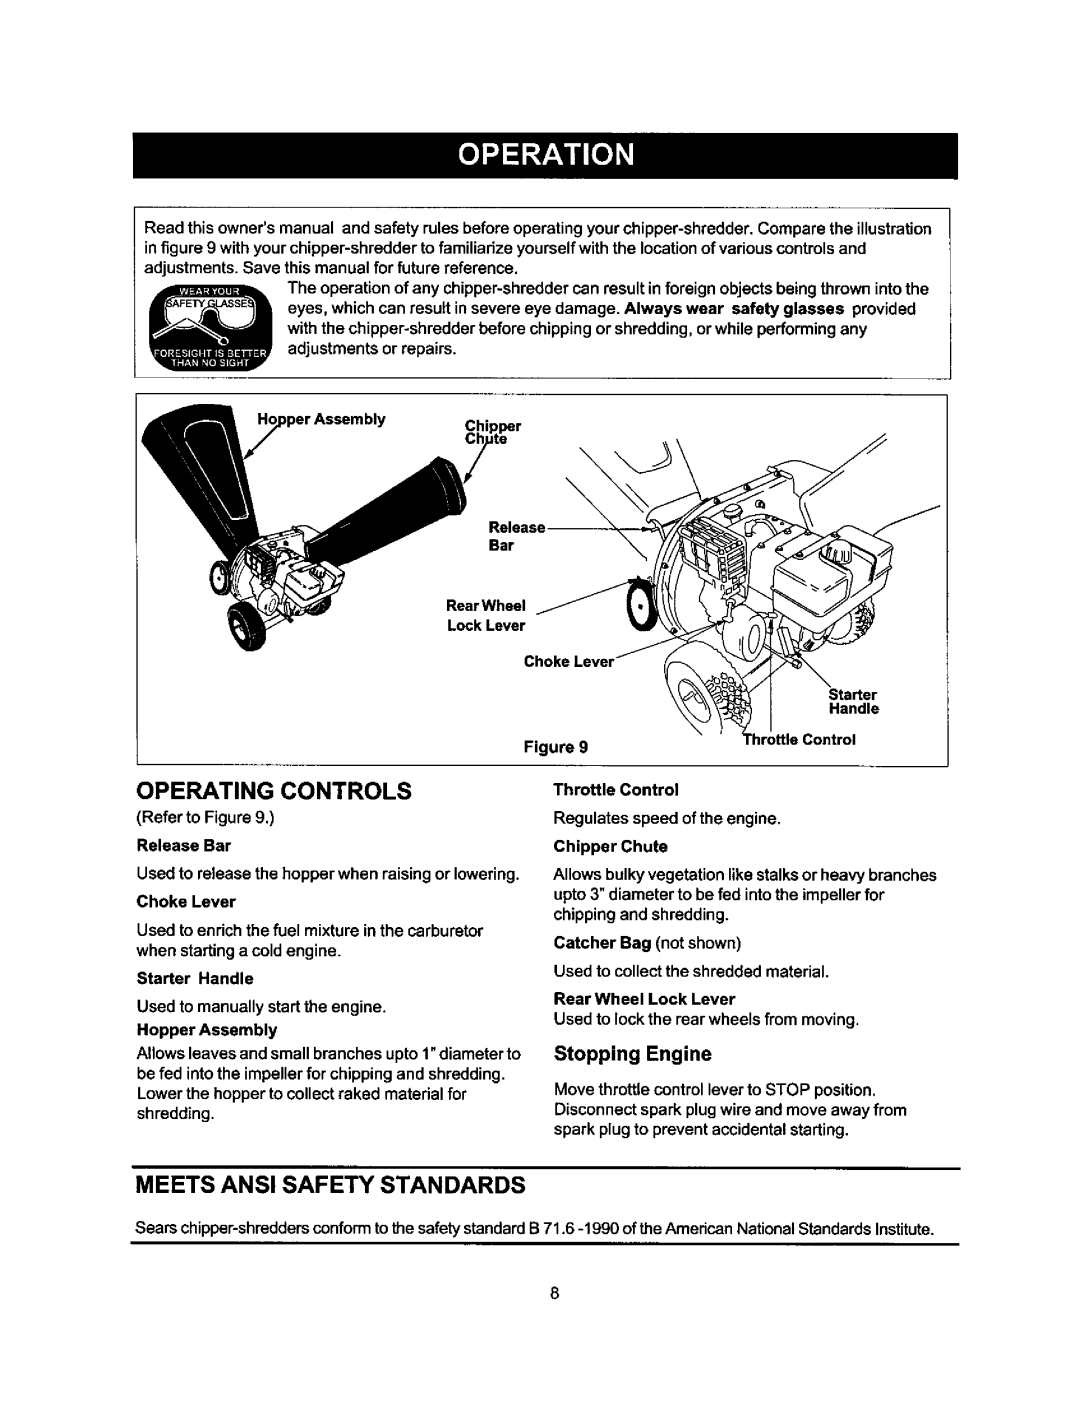 Craftsman 247.77588O owner manual Operating Controls, Meets Ansi Safety Standards, Stopping Engine 